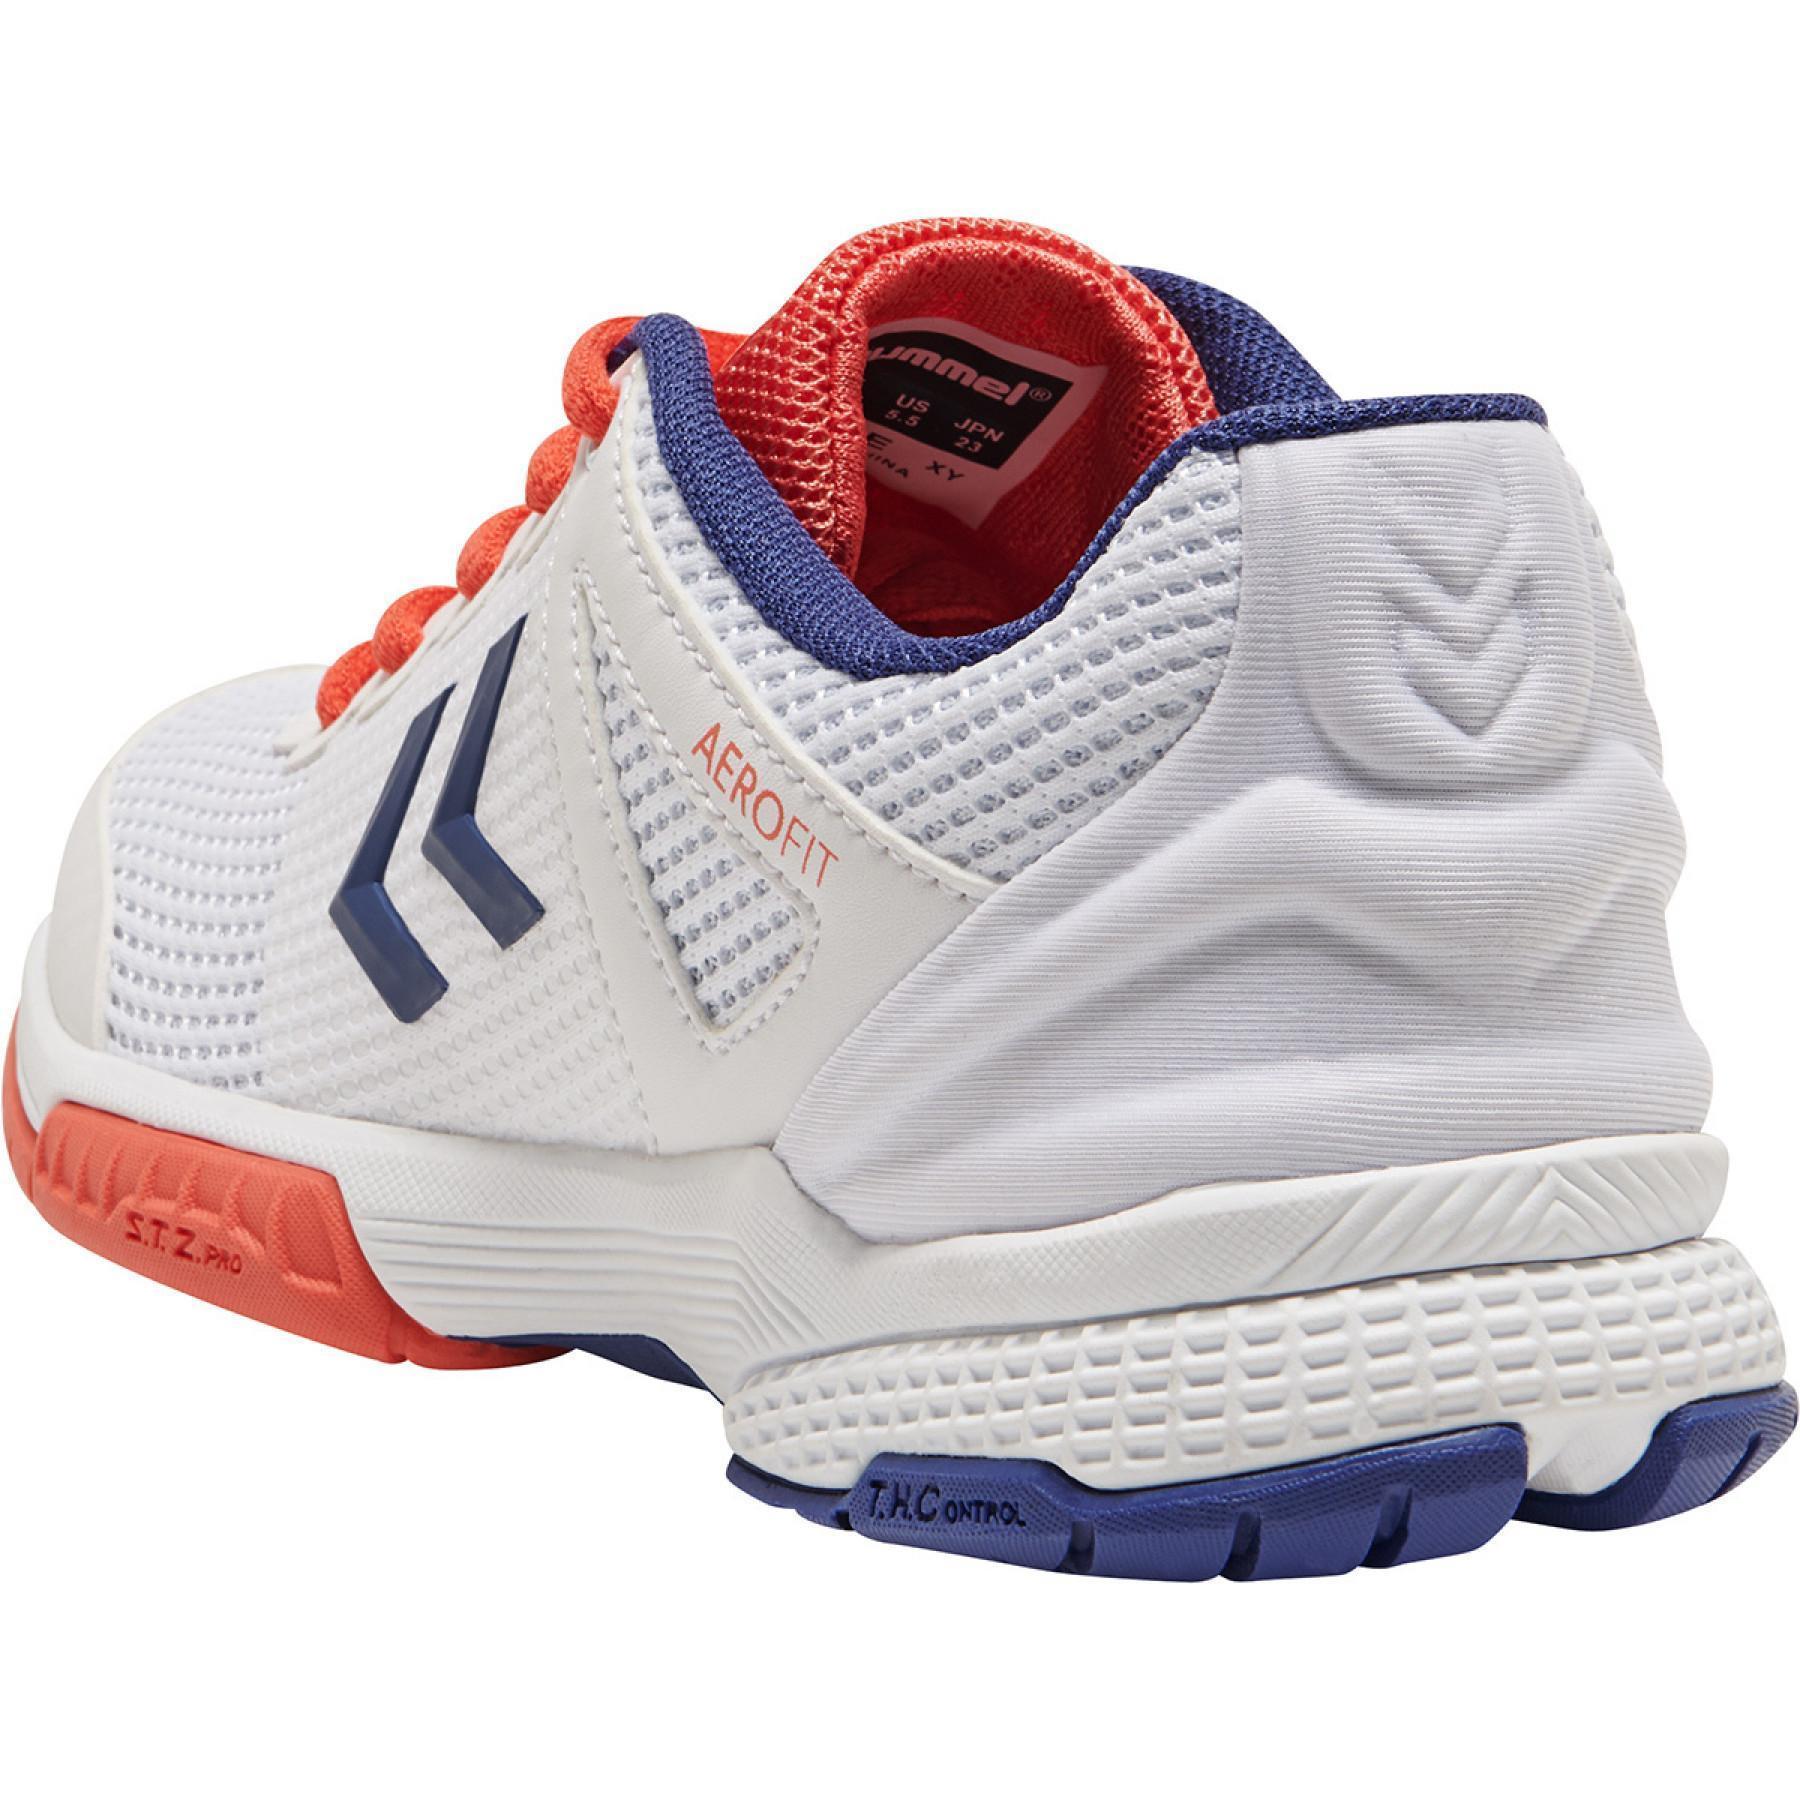 Women's shoes Hummel aerocharge hb180 rely 3.0